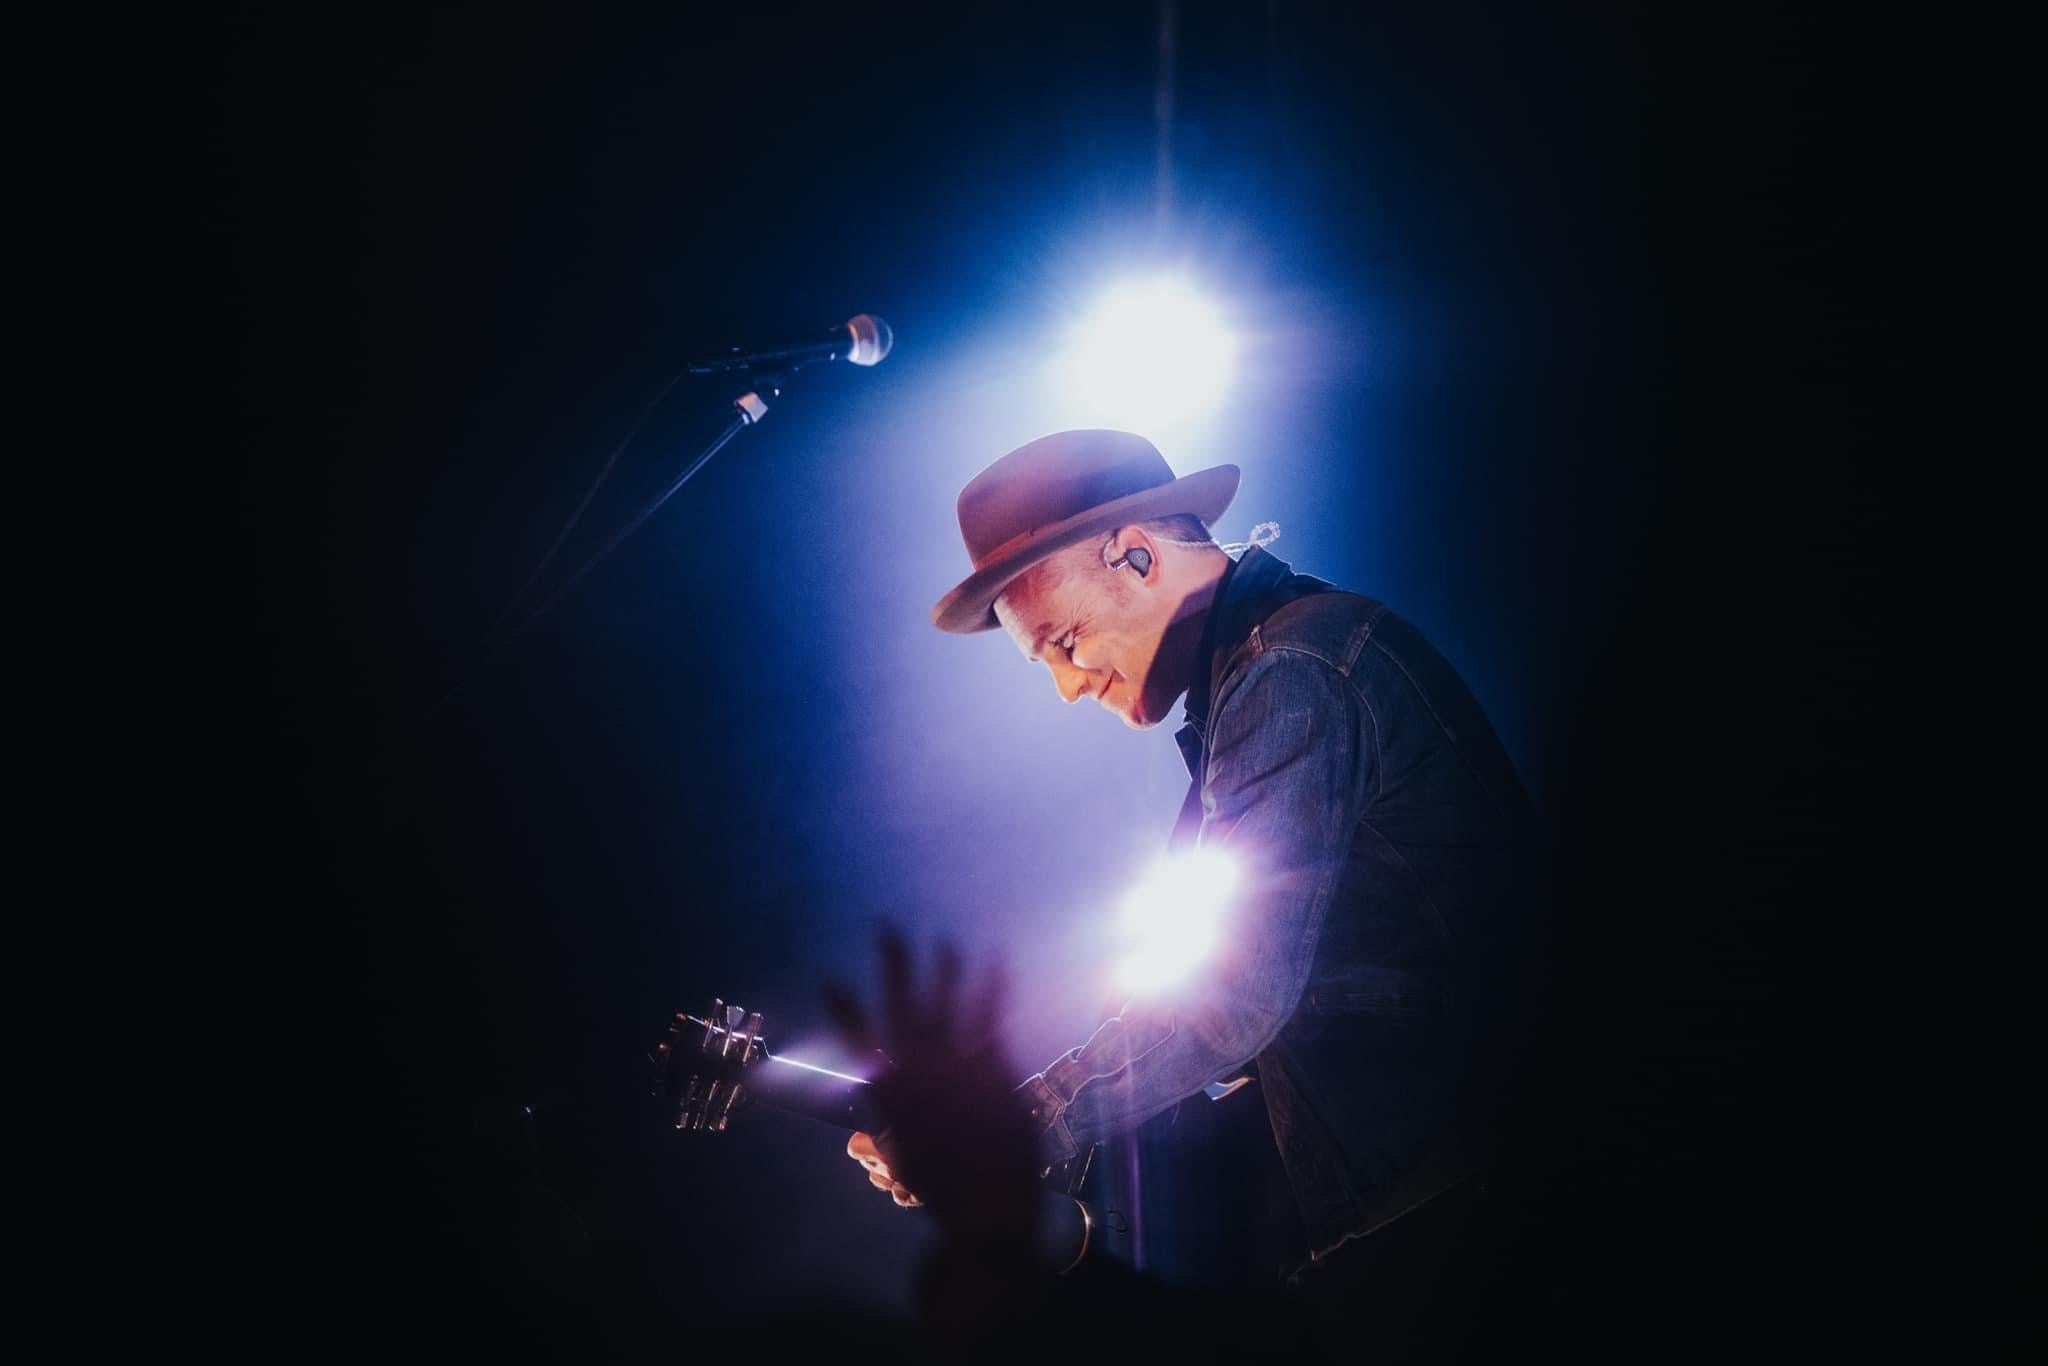 Scott Smith wearing IEMs and a hat plays an acoustic guitar under a spotlight.